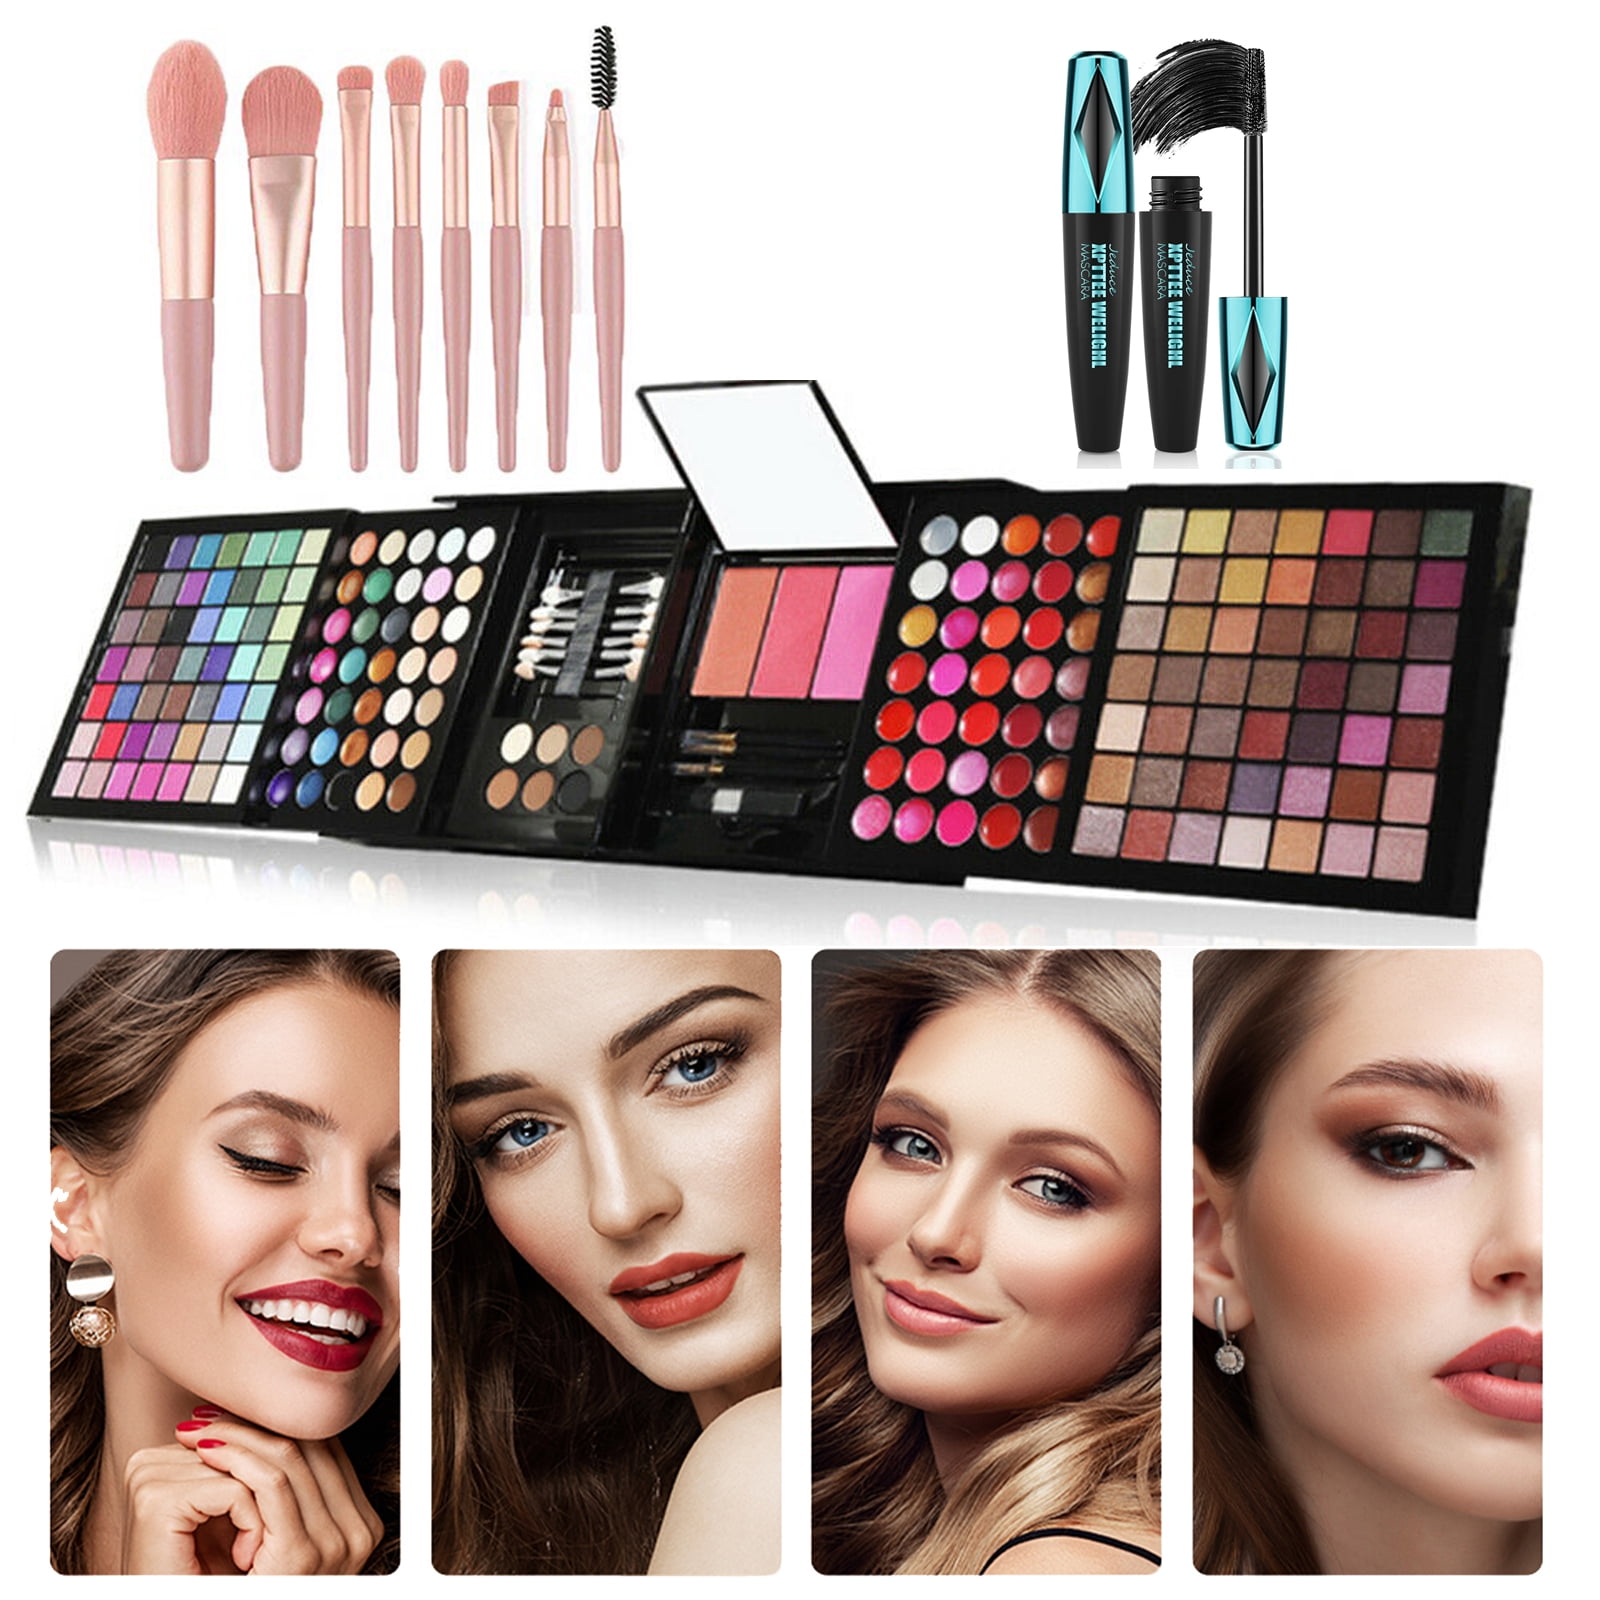 Cosprof Mixed Beauty Makeup Kit, Set All in One, Color Matte Shimmer Eyeshadow Palette Mascara Blushes Lipstick Makeup Brush Set, Box Birthday Gifts for Teenager Women - Walmart.com